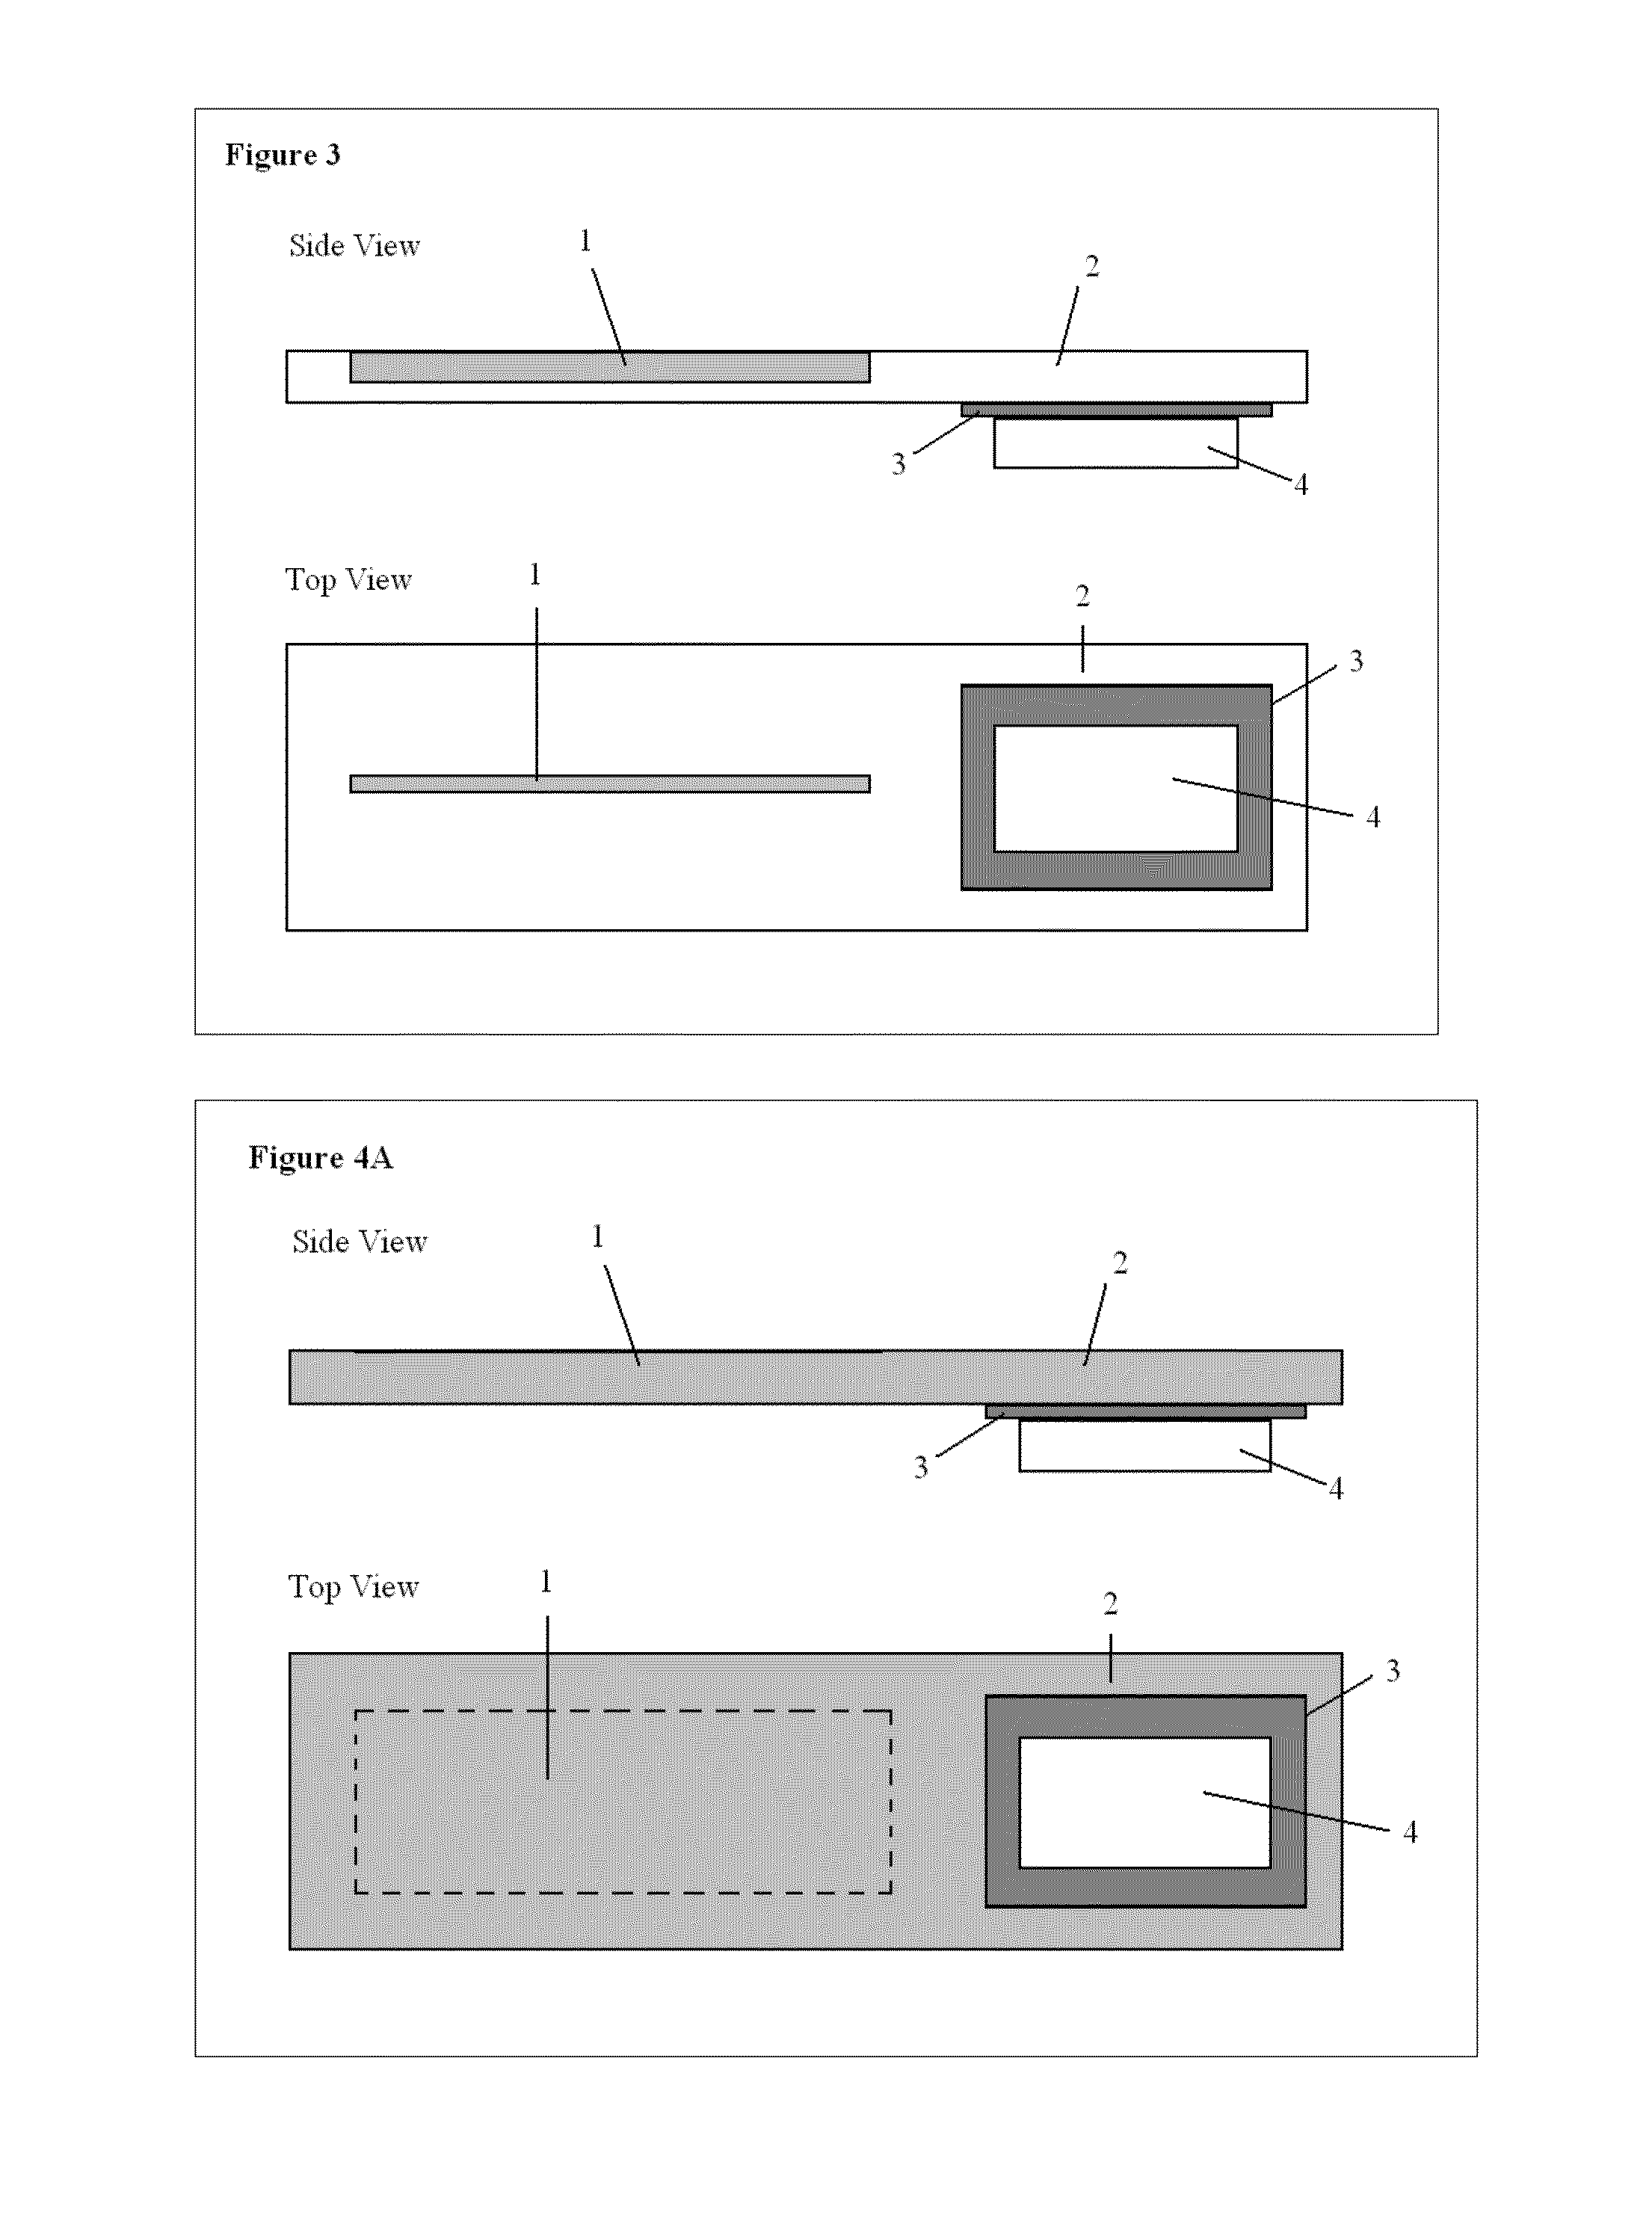 Detection method and apparatus for reduced cross -talk and asic area of a fingerprint sensor